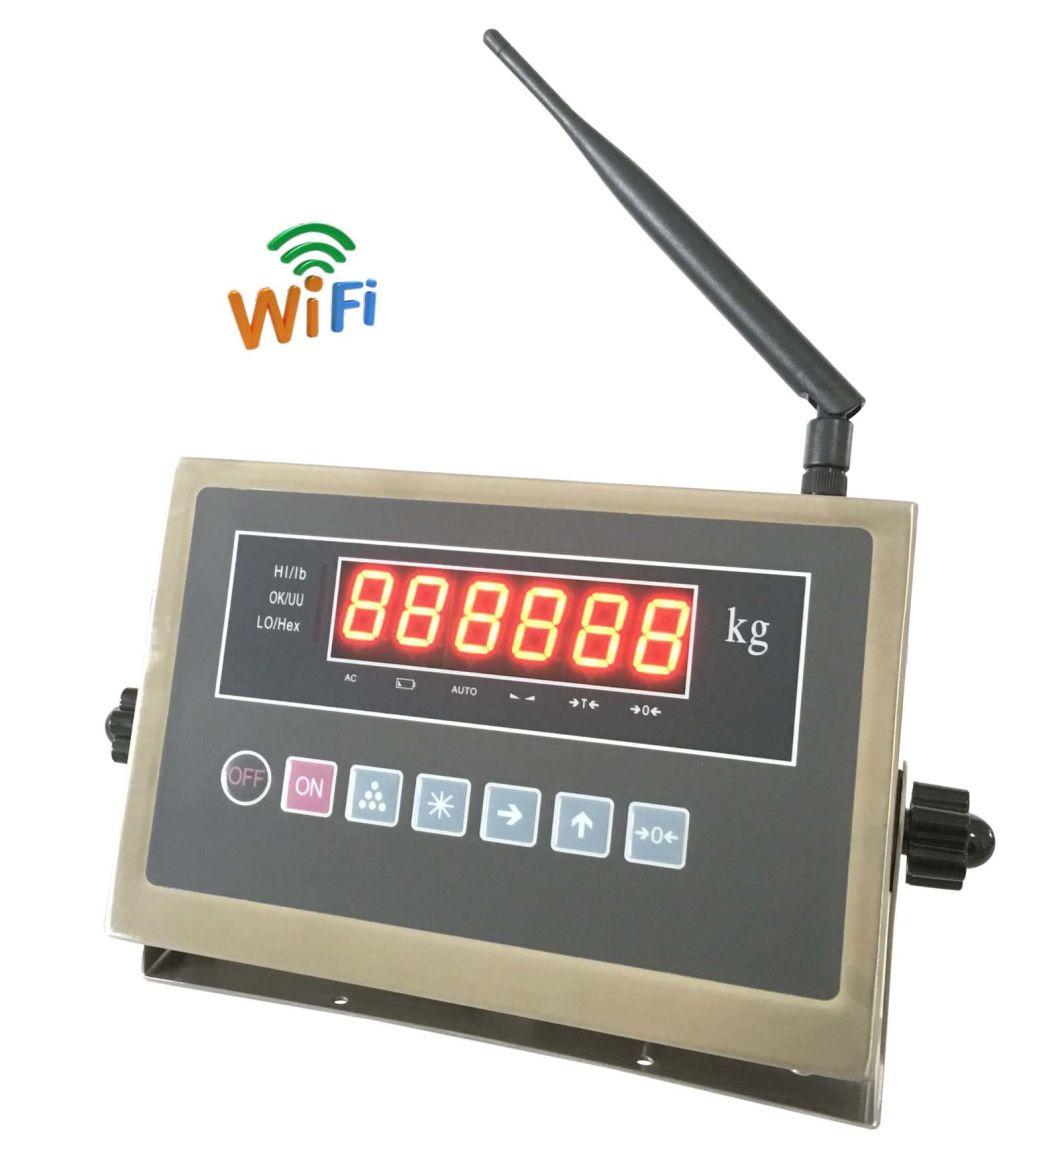 Stainless Steel WiFi-Weighing Indicator (315A1-RB-WiFi)